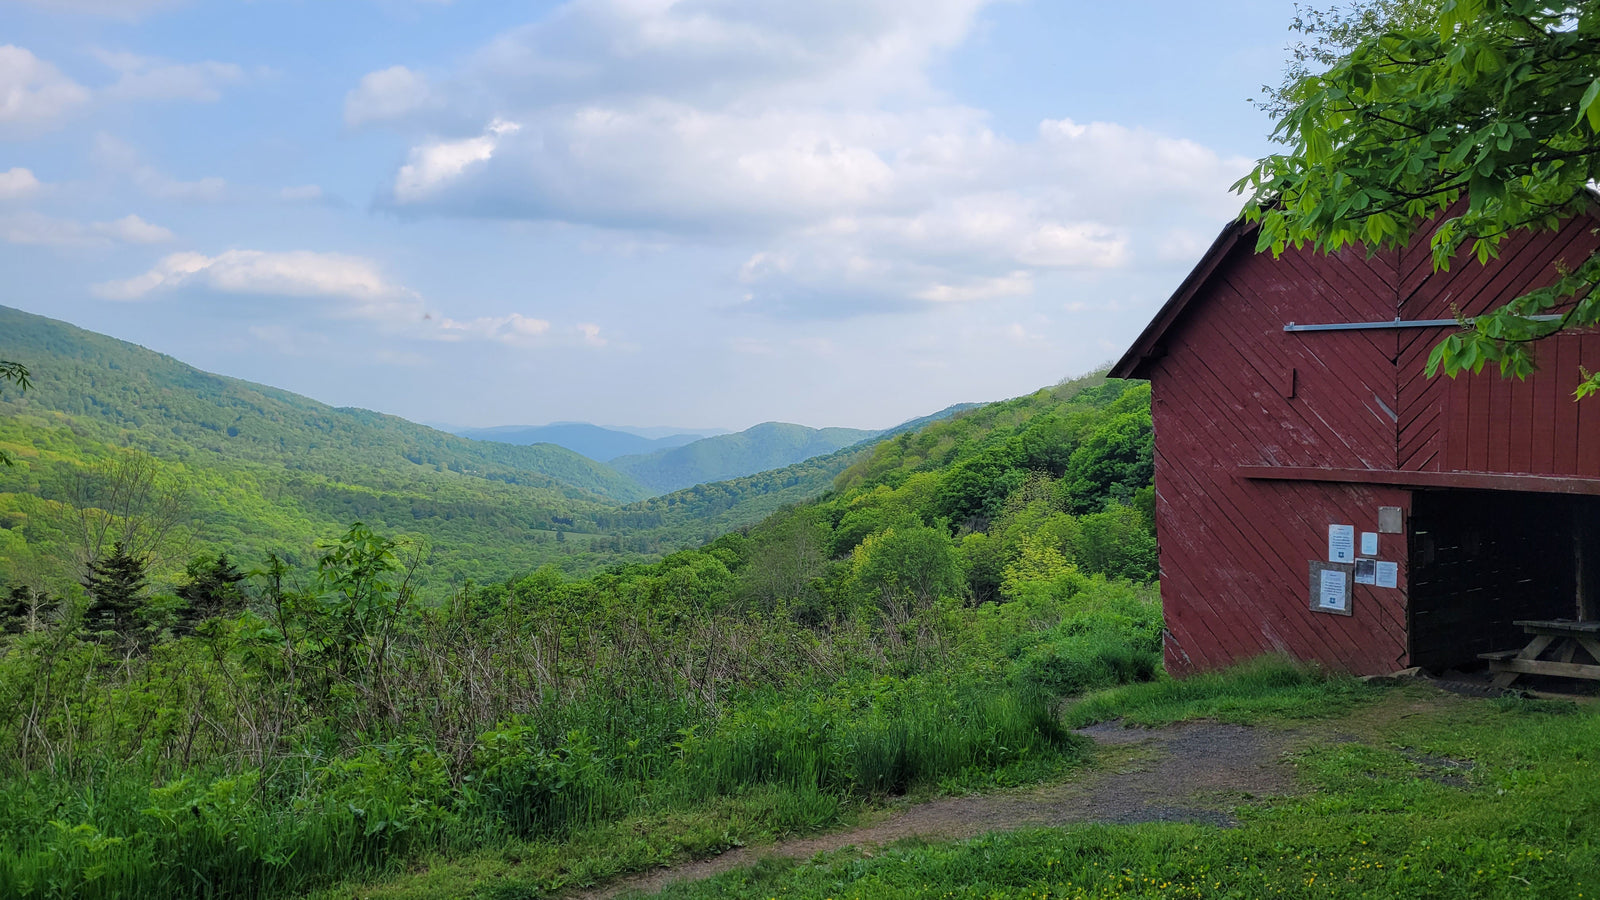 Trip Report: Becky in the Roan Highlands